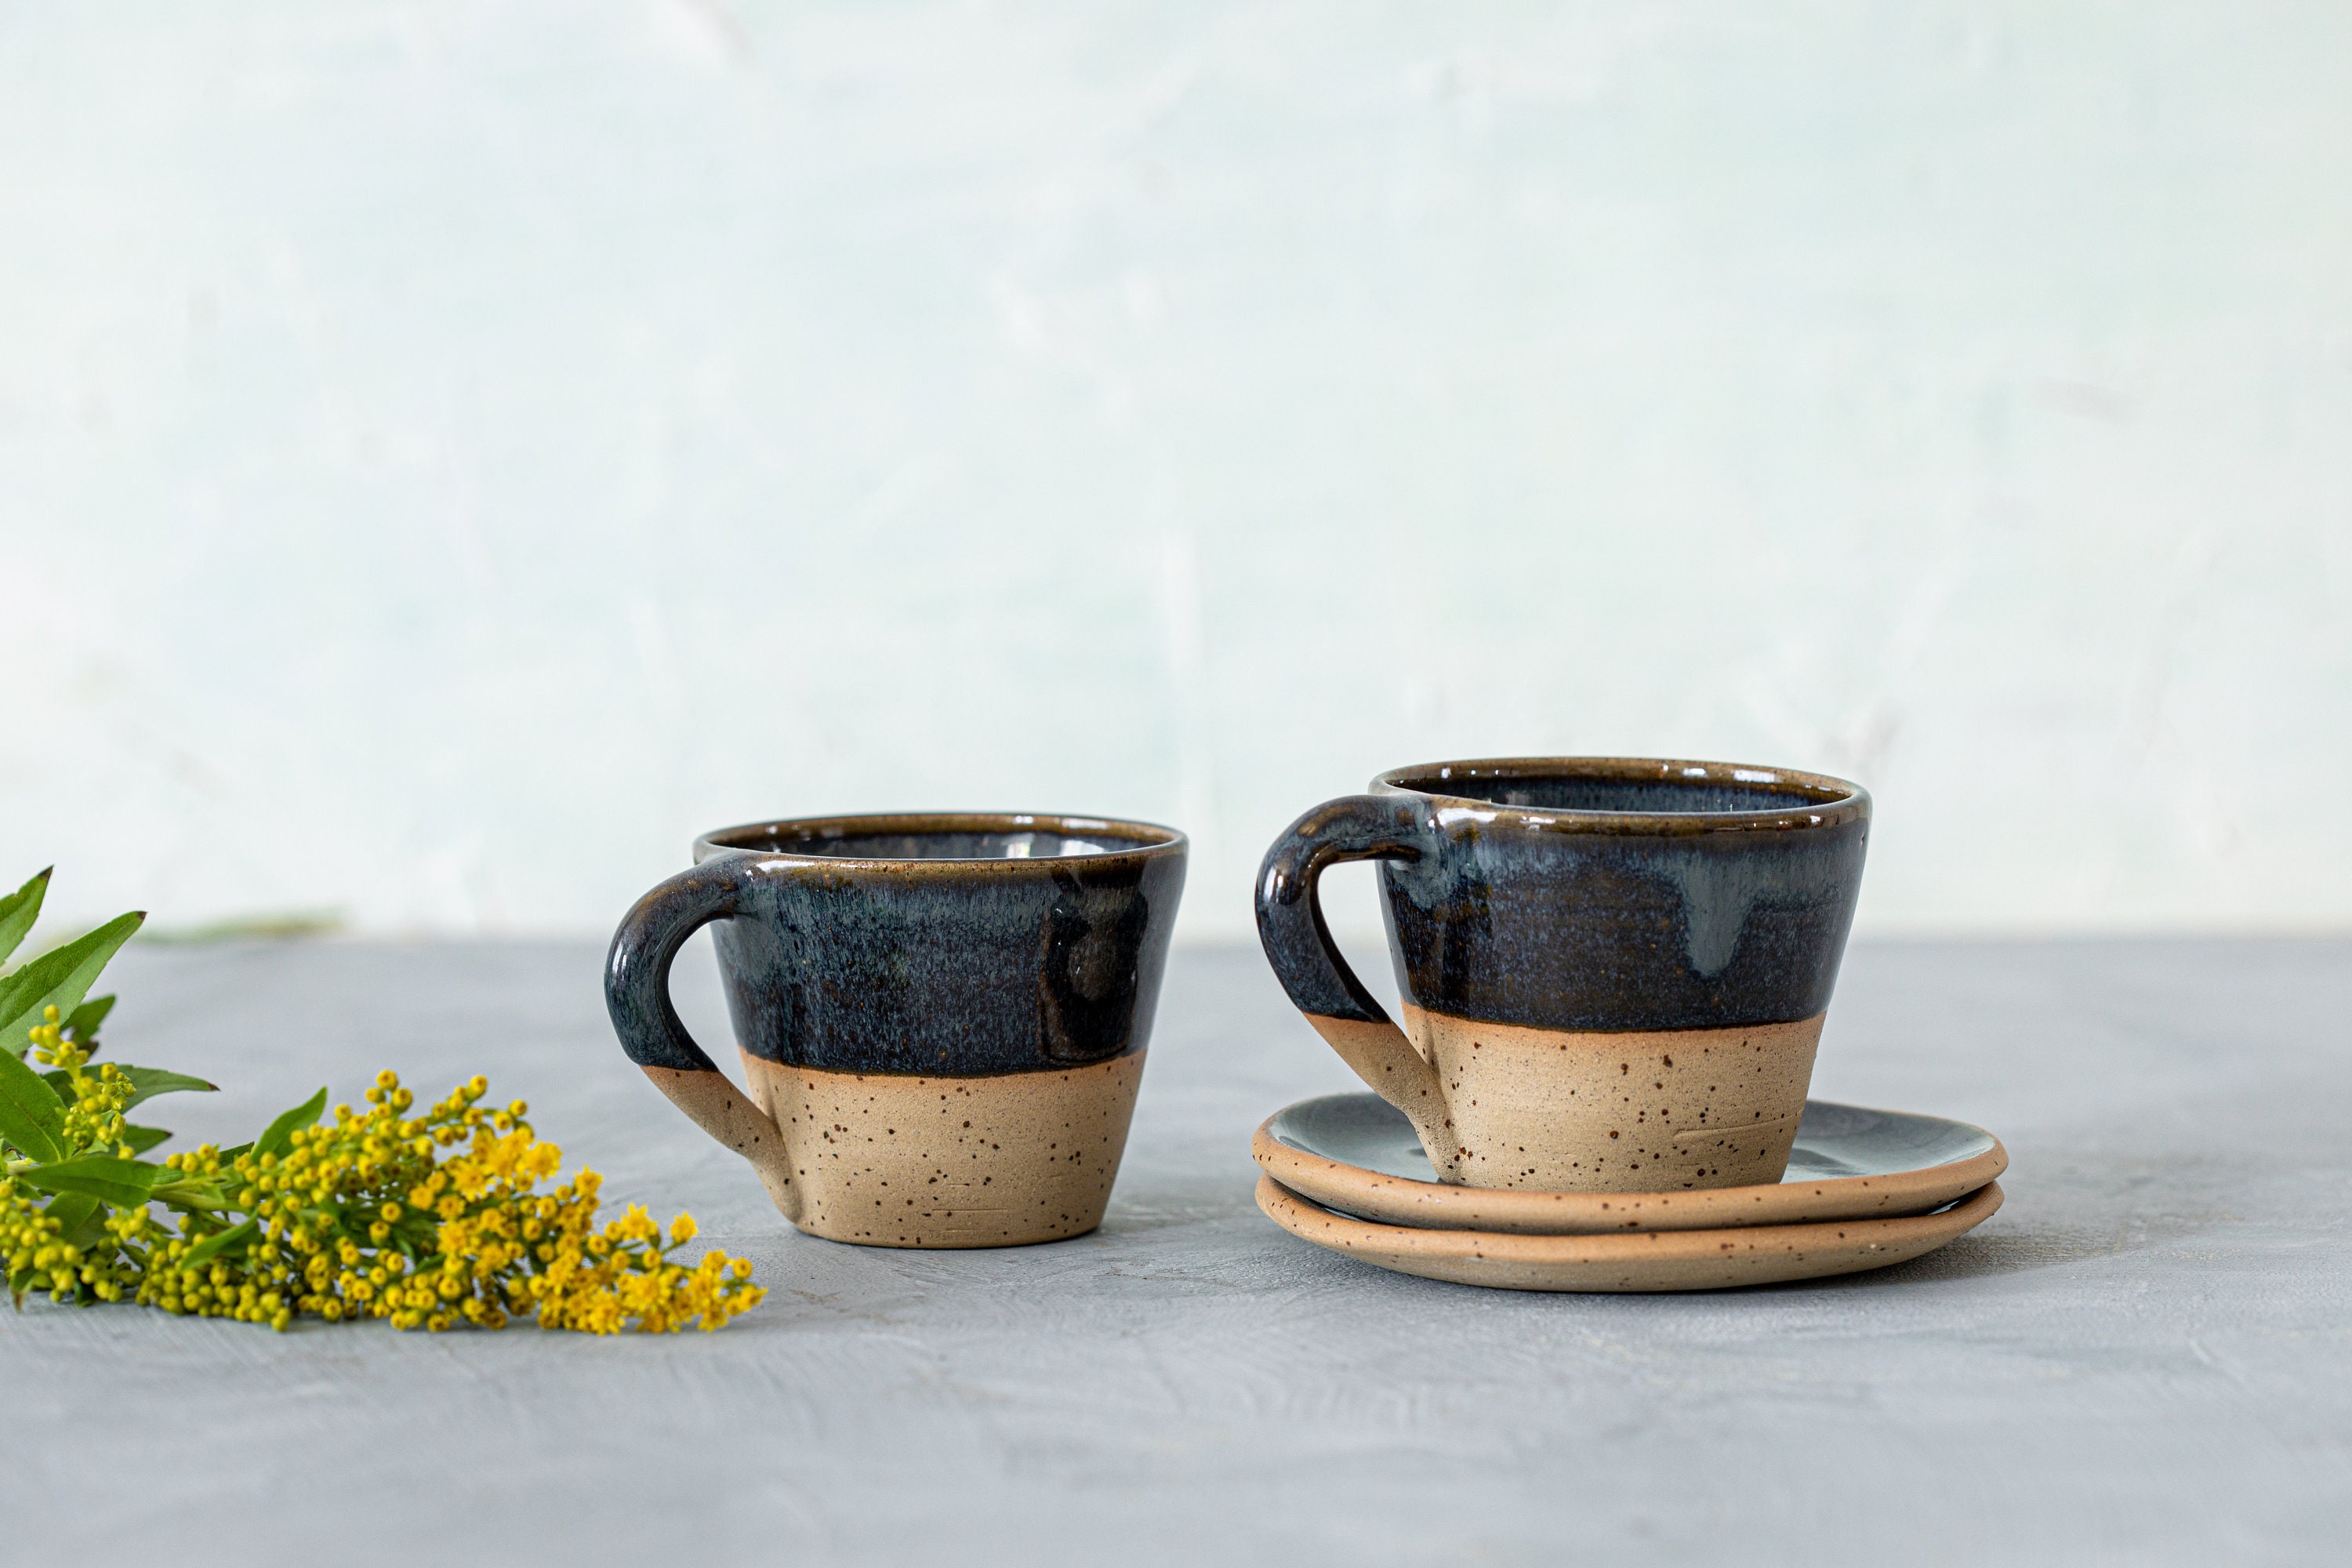 2 Pottery Black Cone Shape Espresso Cups Set of Two 4oz -  Norway